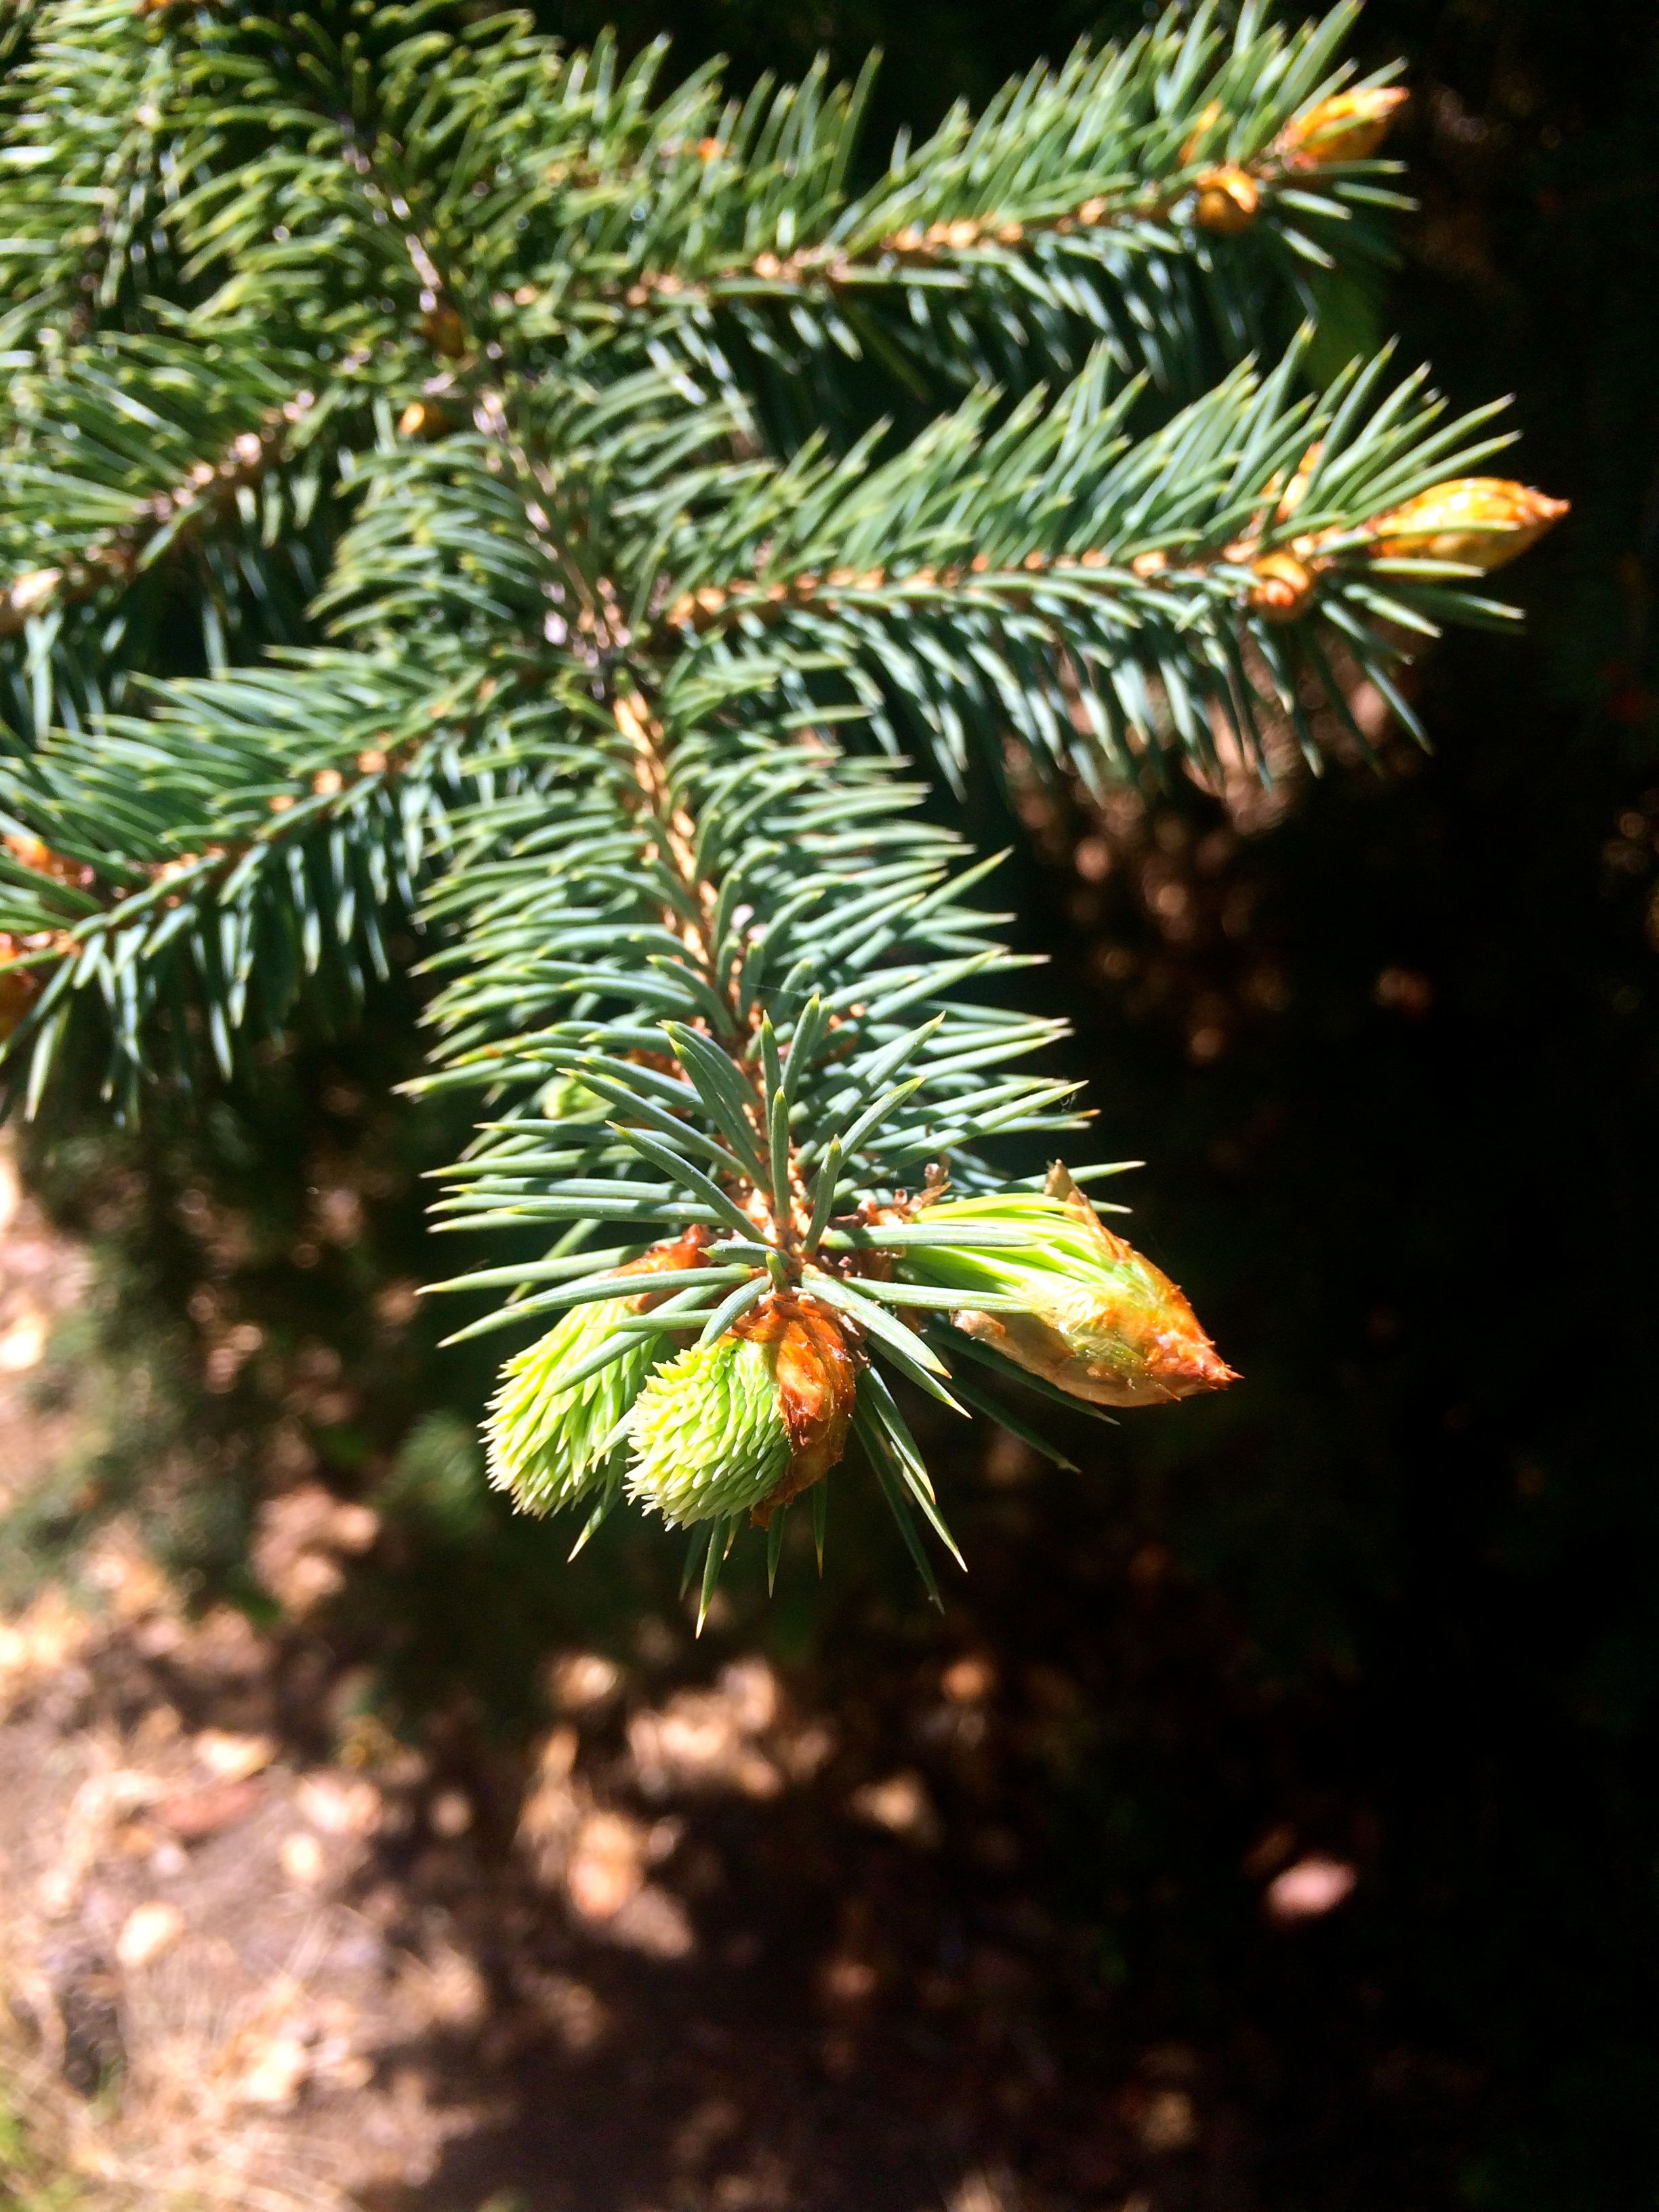 Spruce tips pushing through their brown papery casings.